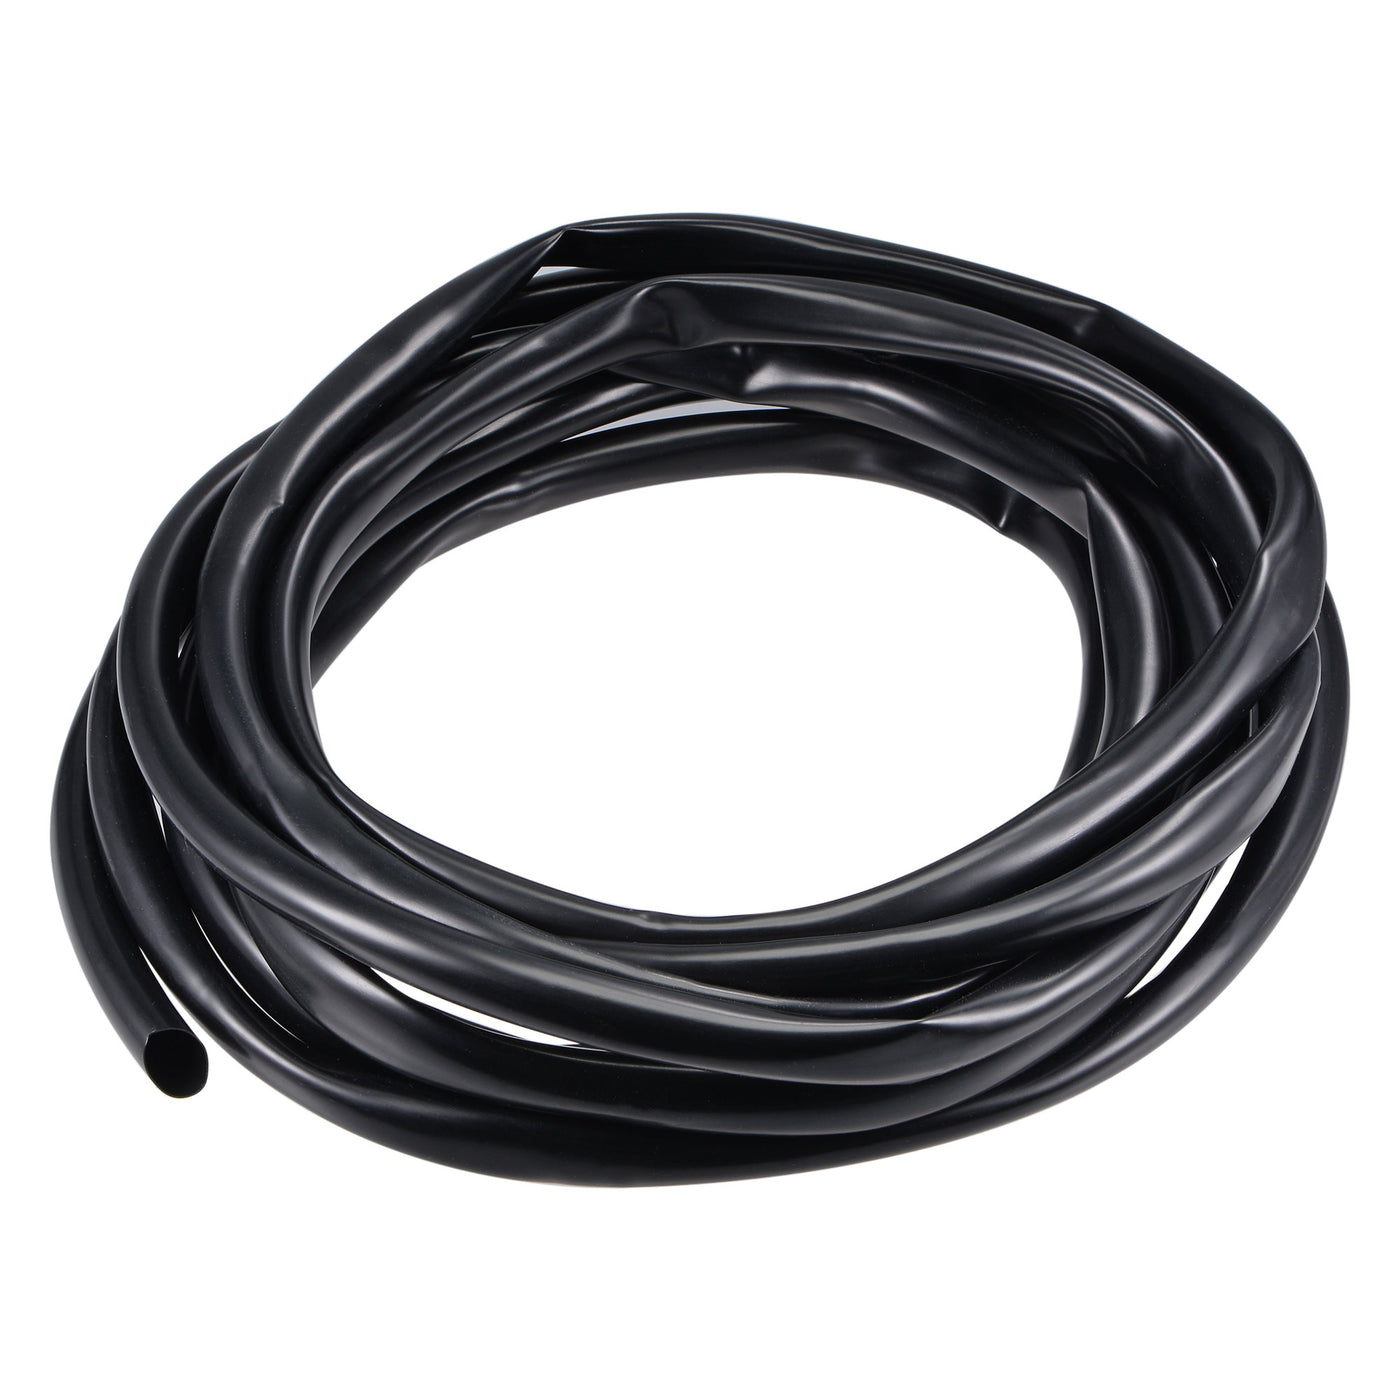 Uxcell Uxcell Black PVC Tube Wire Harness Tubing, 18mm ID 23ft Sleeve for Wire Sheathing Wire Protection